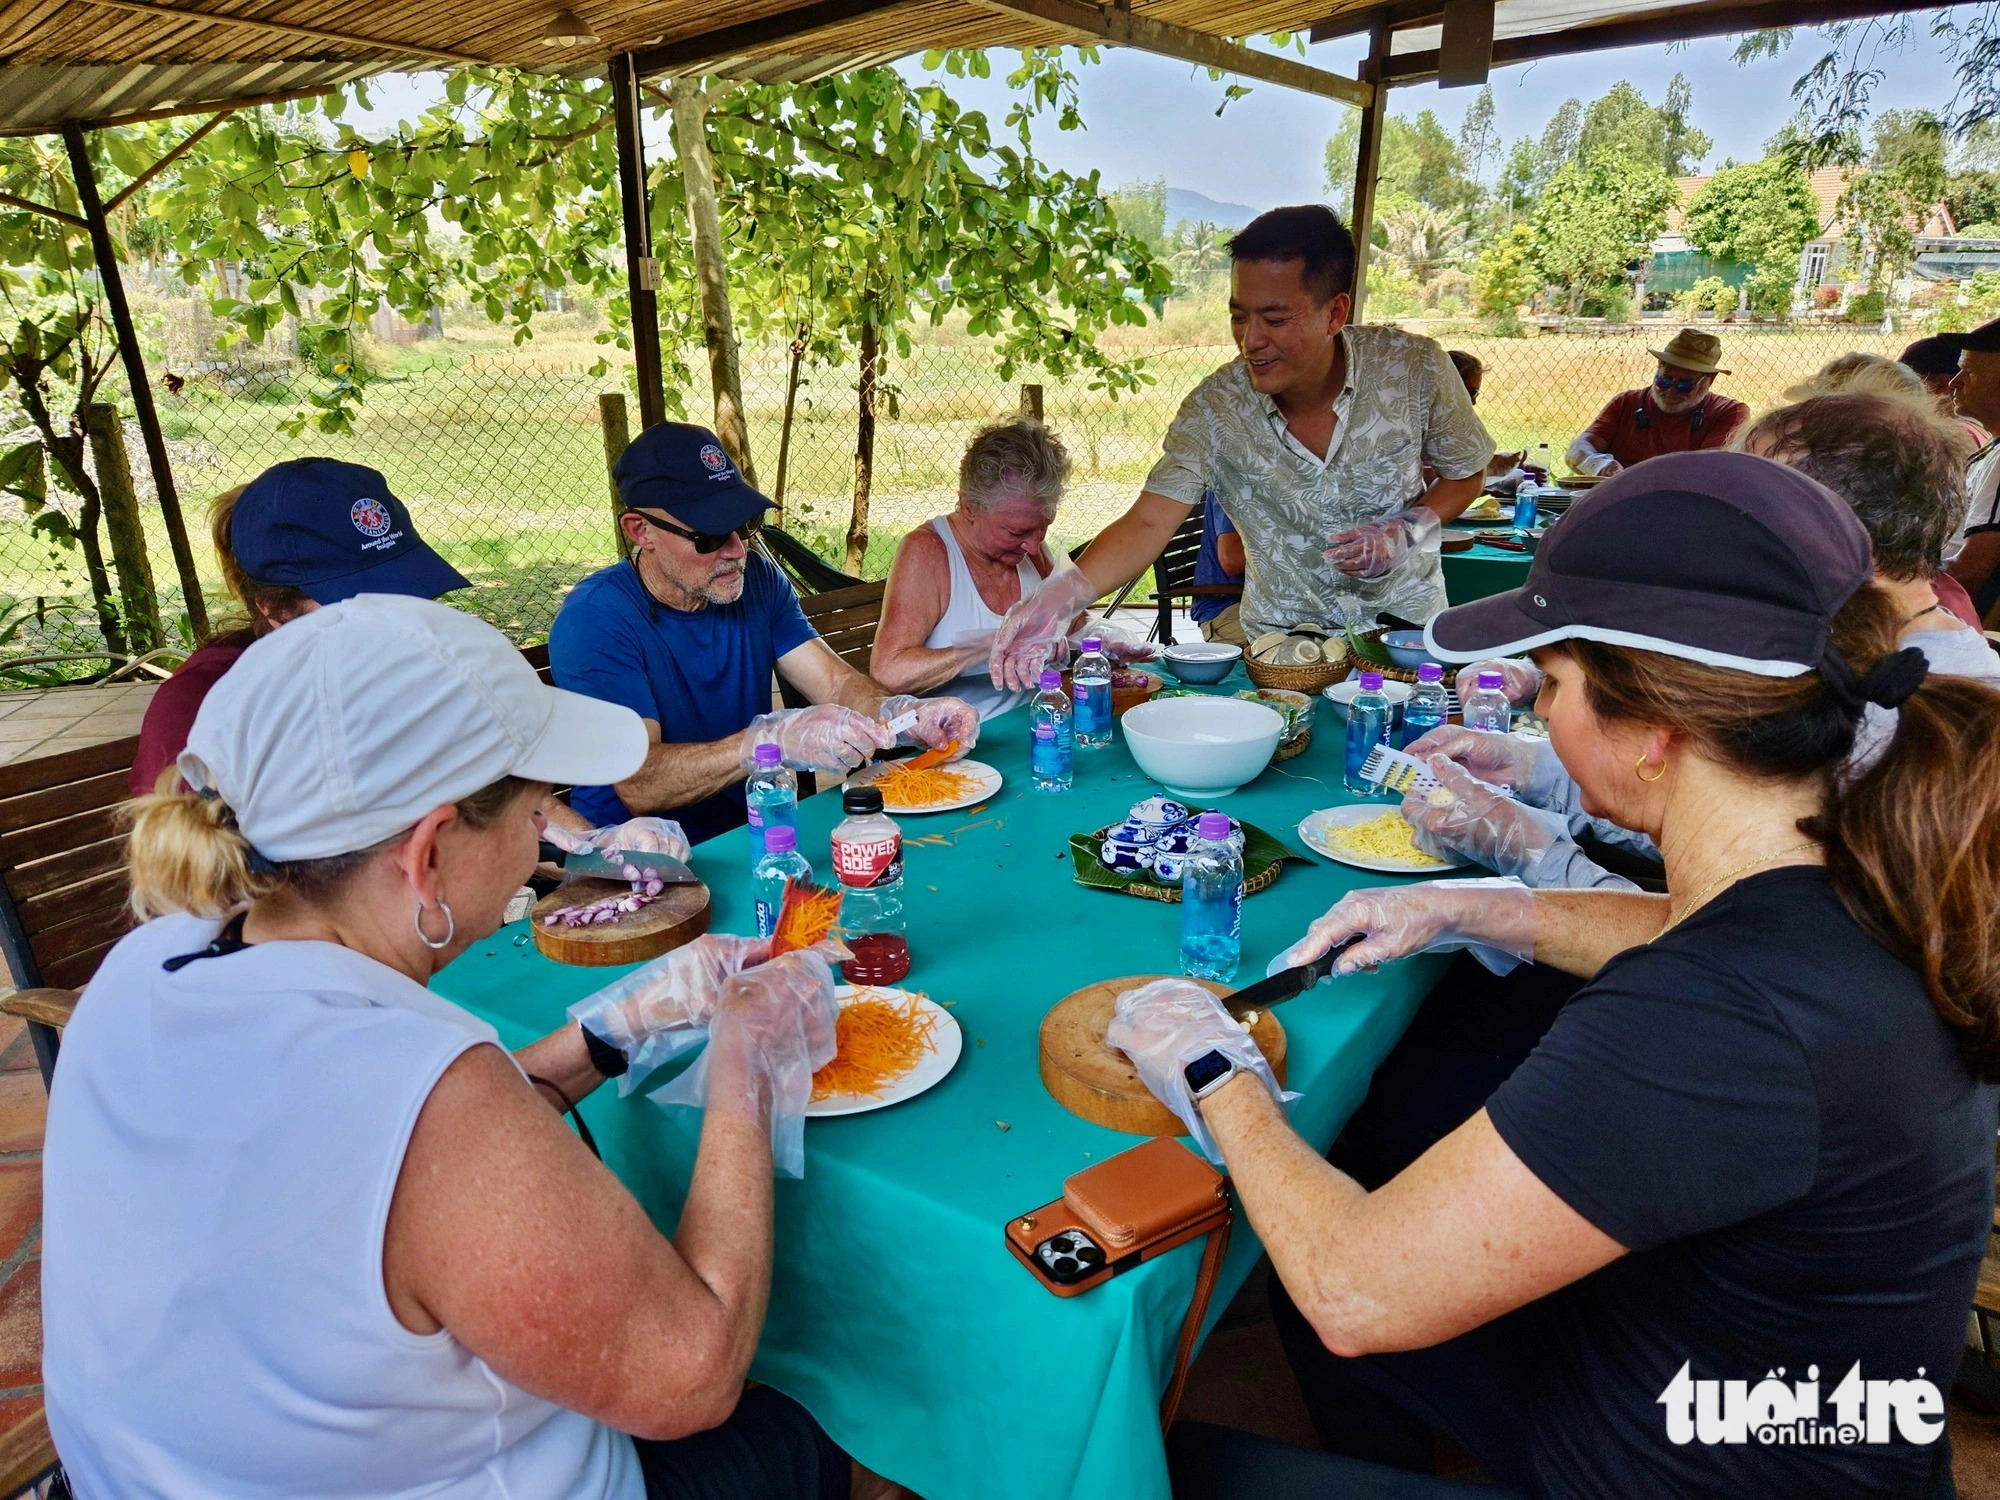 This image shows a culinary class organized for international travelers as part of their countryside tour in Nha Trang City, Khanh Hoa Province, south-central Vietnam. Photo: Minh Chien / Tuoi Tre